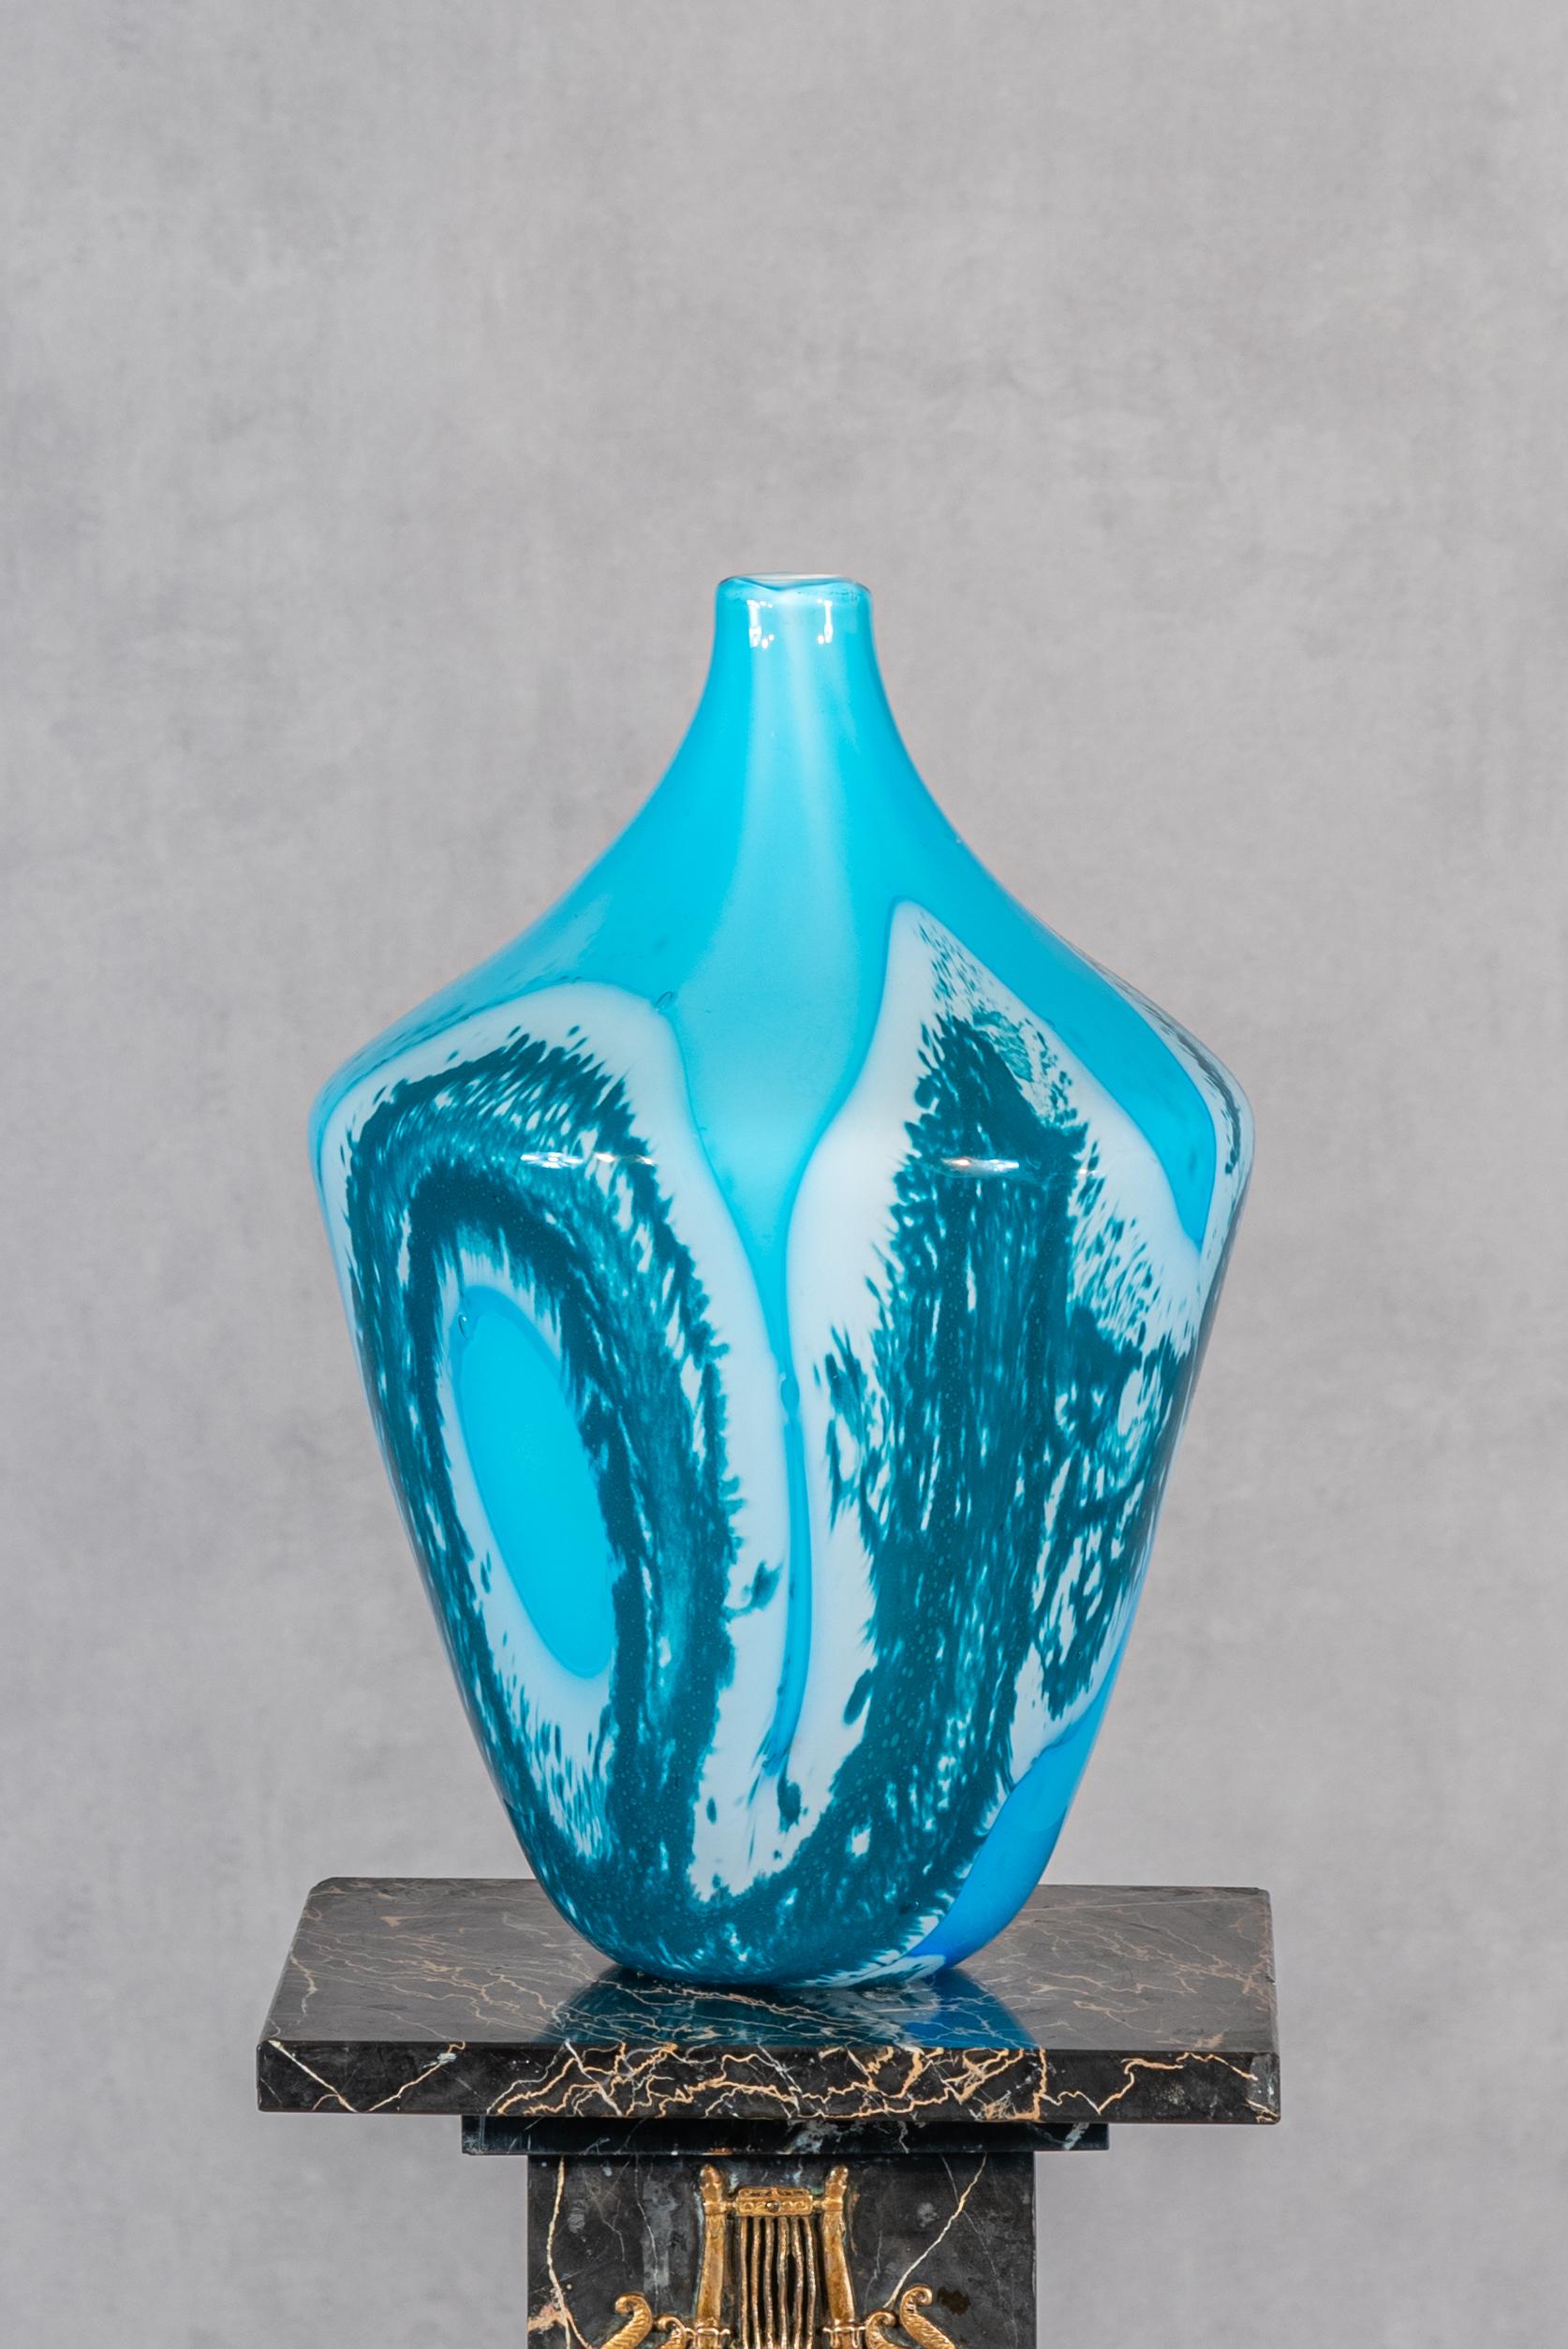 This Small 20th Century Clichy Vase is a captivating piece of art that showcases the beauty and craftsmanship of Clichy glassware. Crafted in the 20th century, it embodies the elegance and refinement for which Clichy is renowned. The vase features a